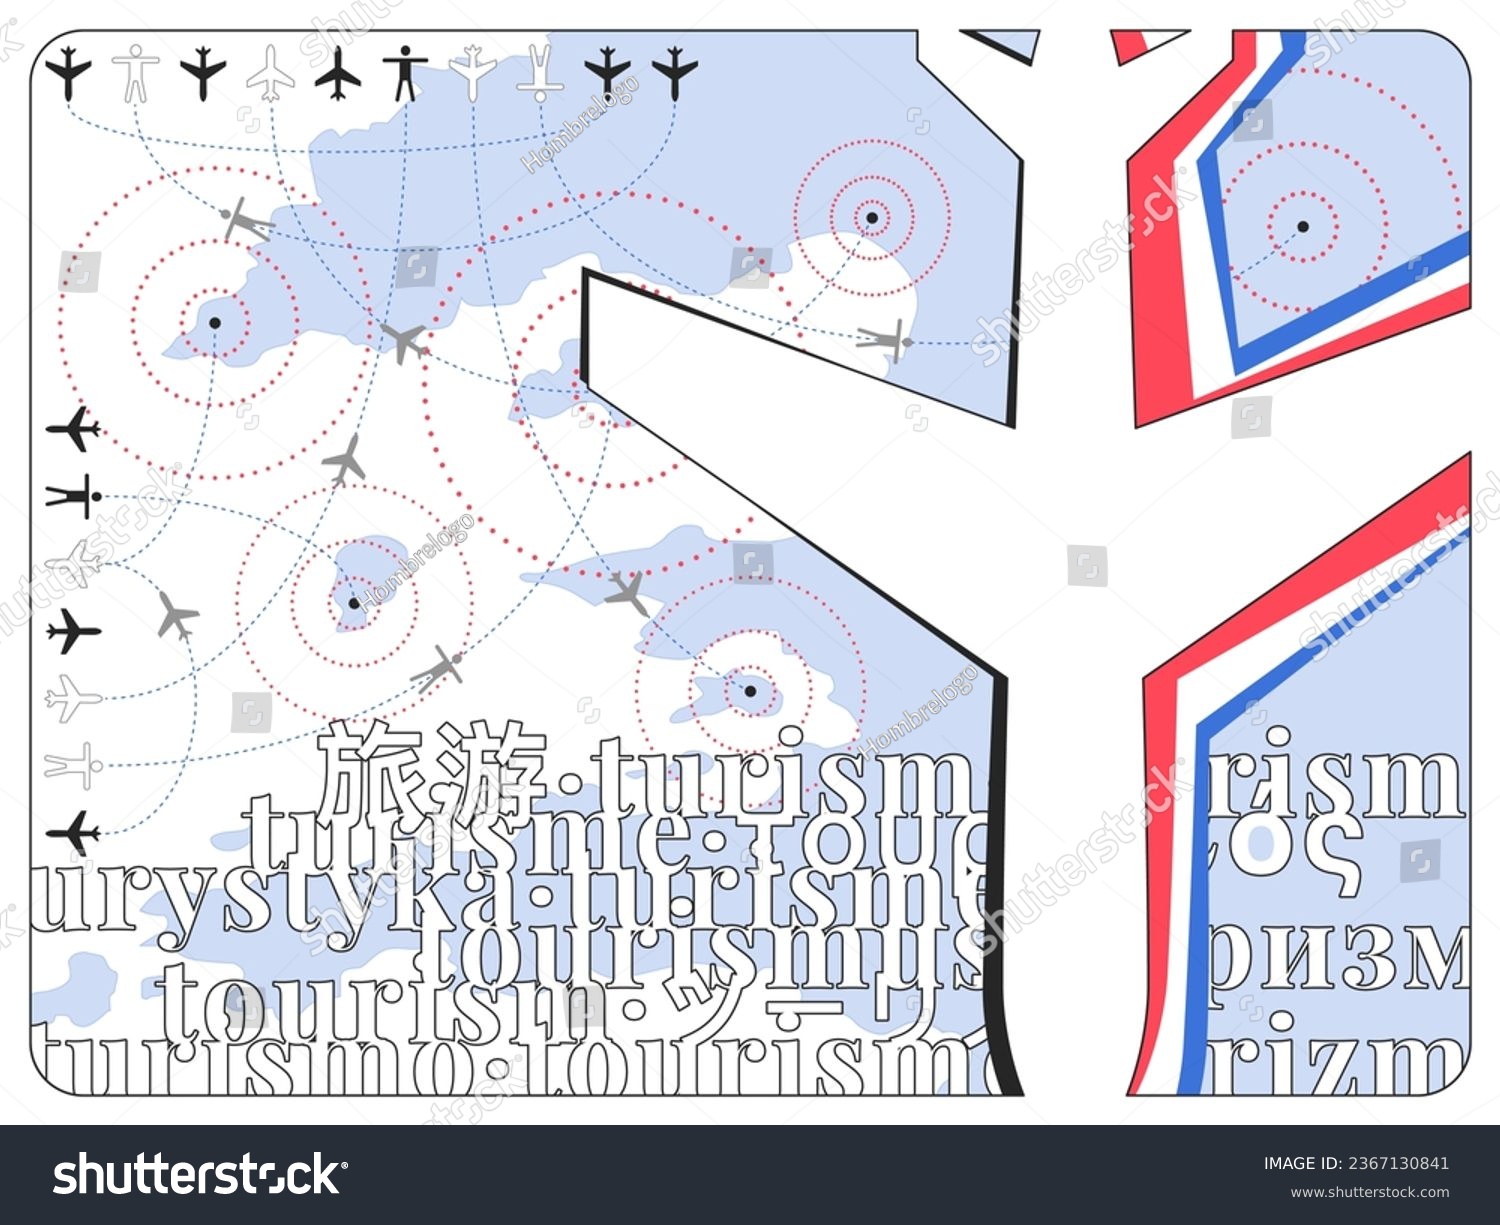 SVG of A minimalist flat representation of the impact of tourism and air transport on destinations svg